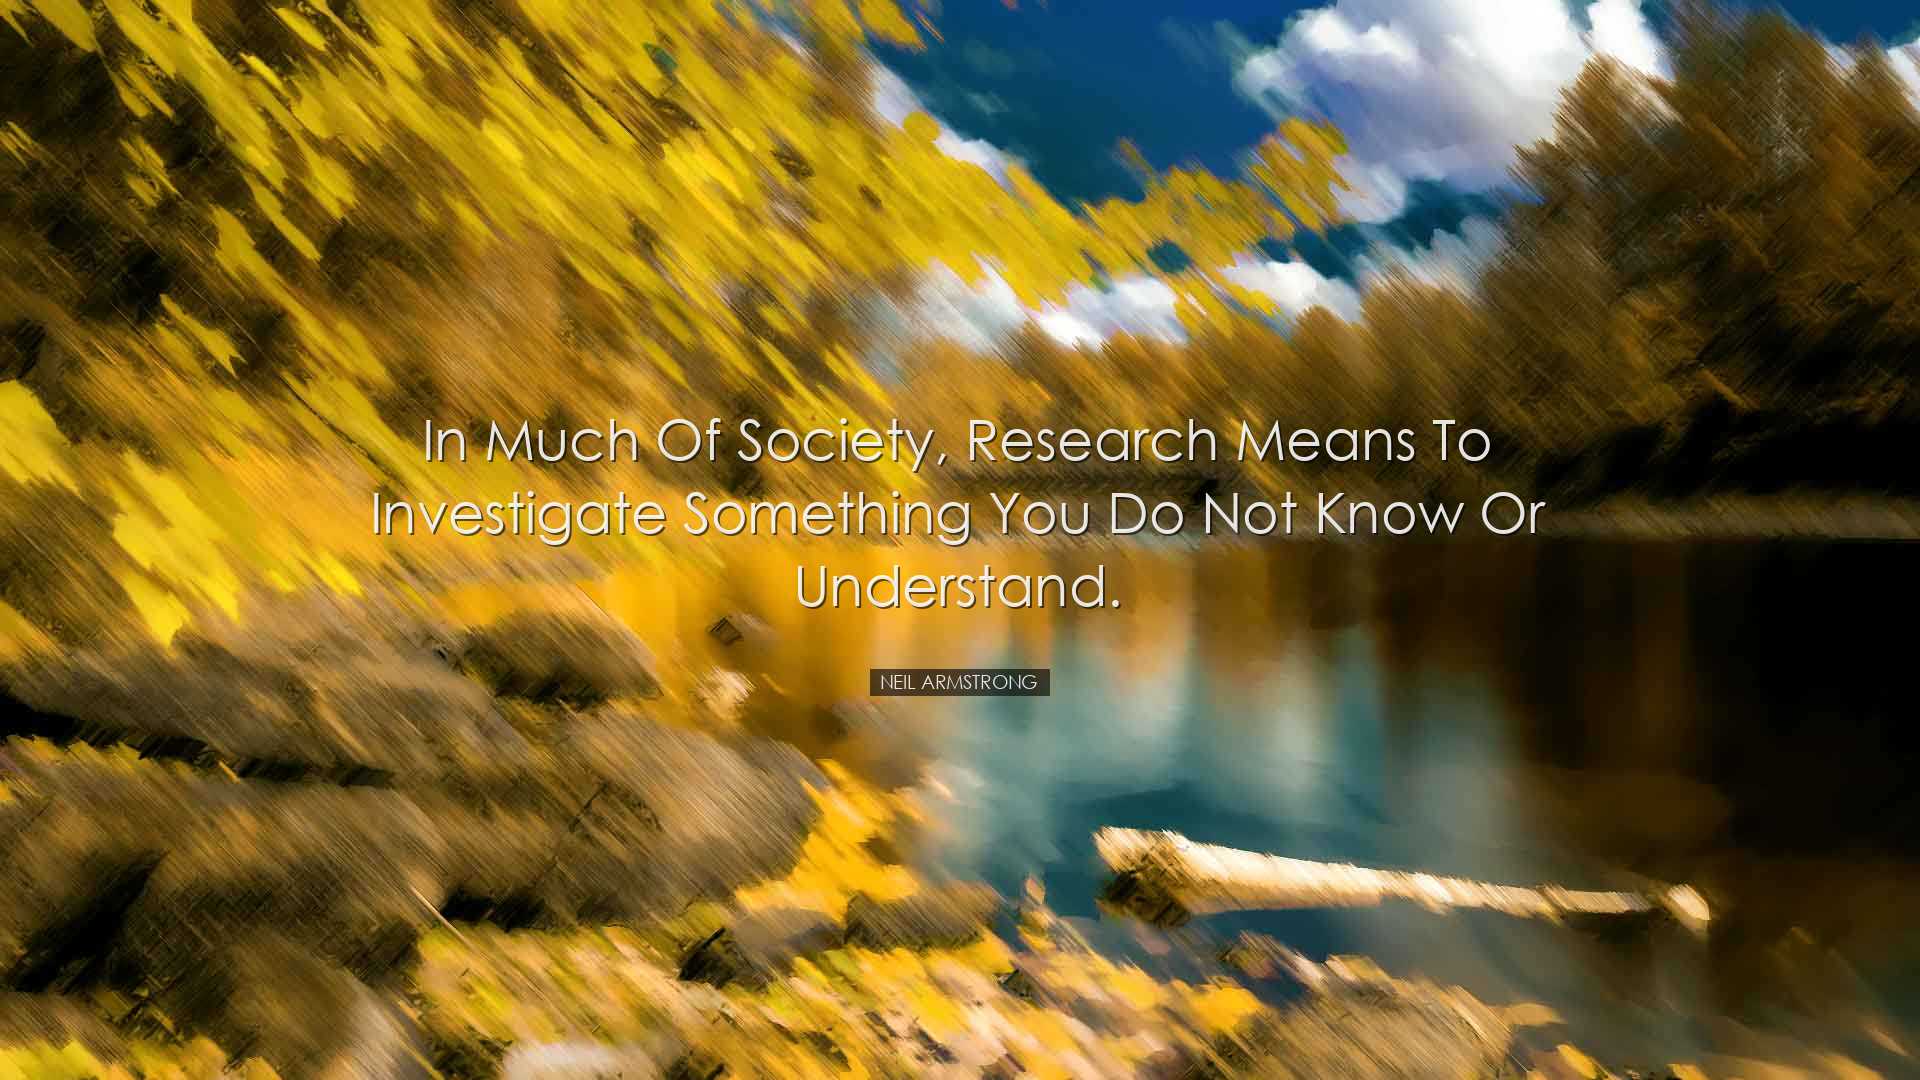 In much of society, research means to investigate something you do